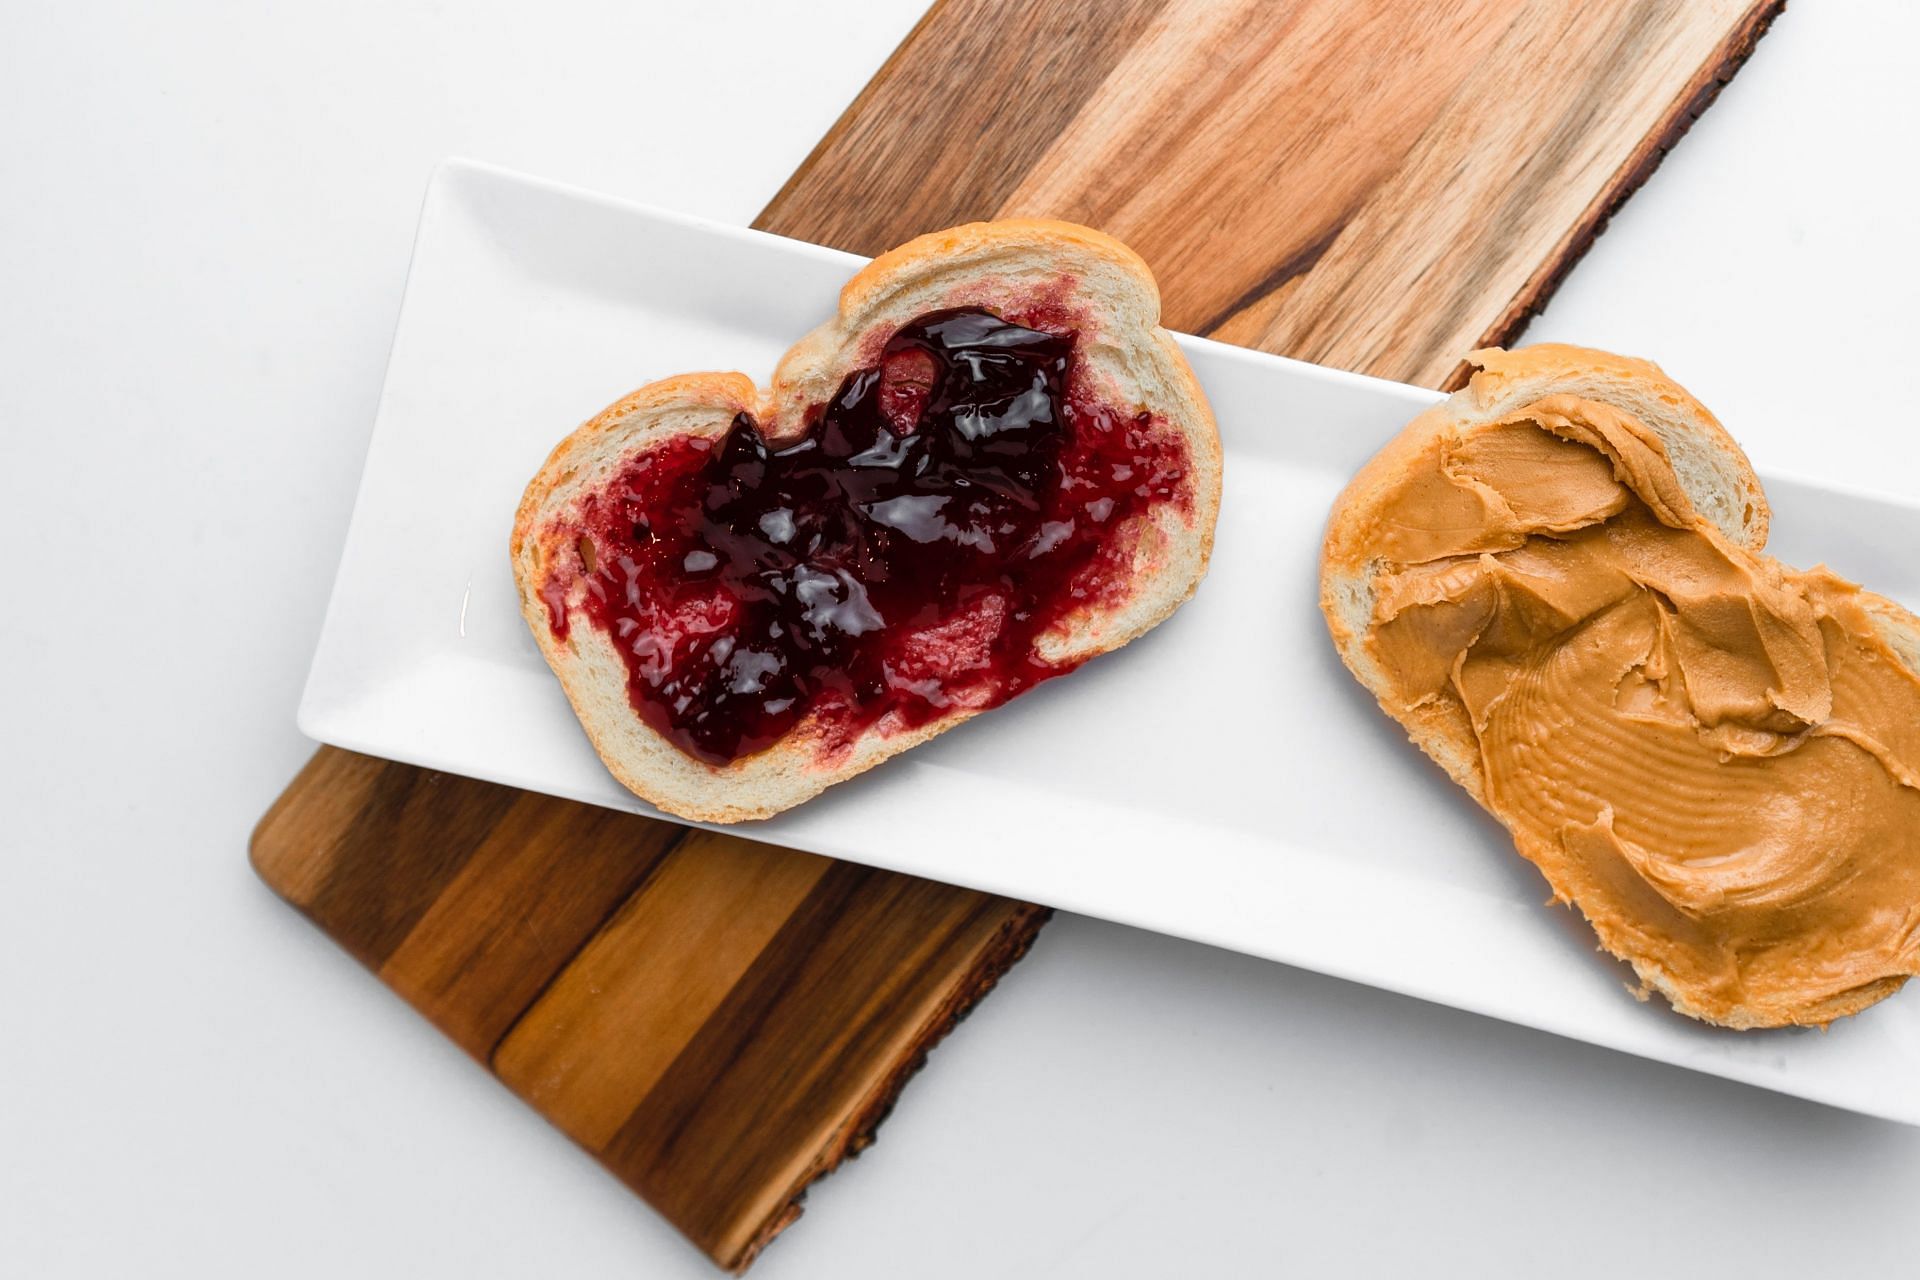 Is peanut butter and jelly healthy? (Image via Unsplash/ Freddy G)